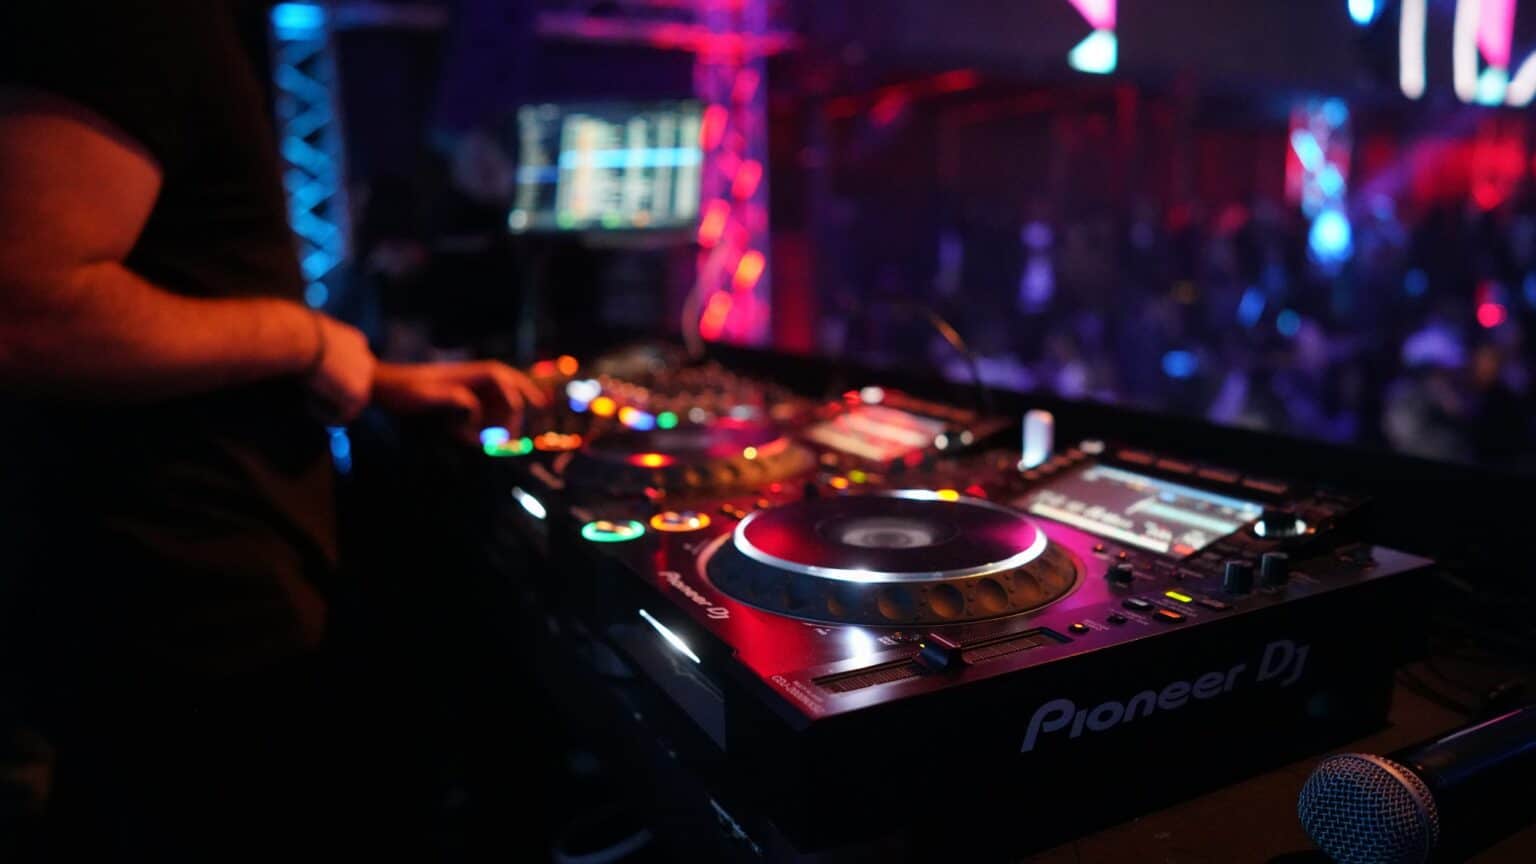 DJ playing at a club night in Edmonton with music supplied by Good Company Entertainment Group's event DJ services